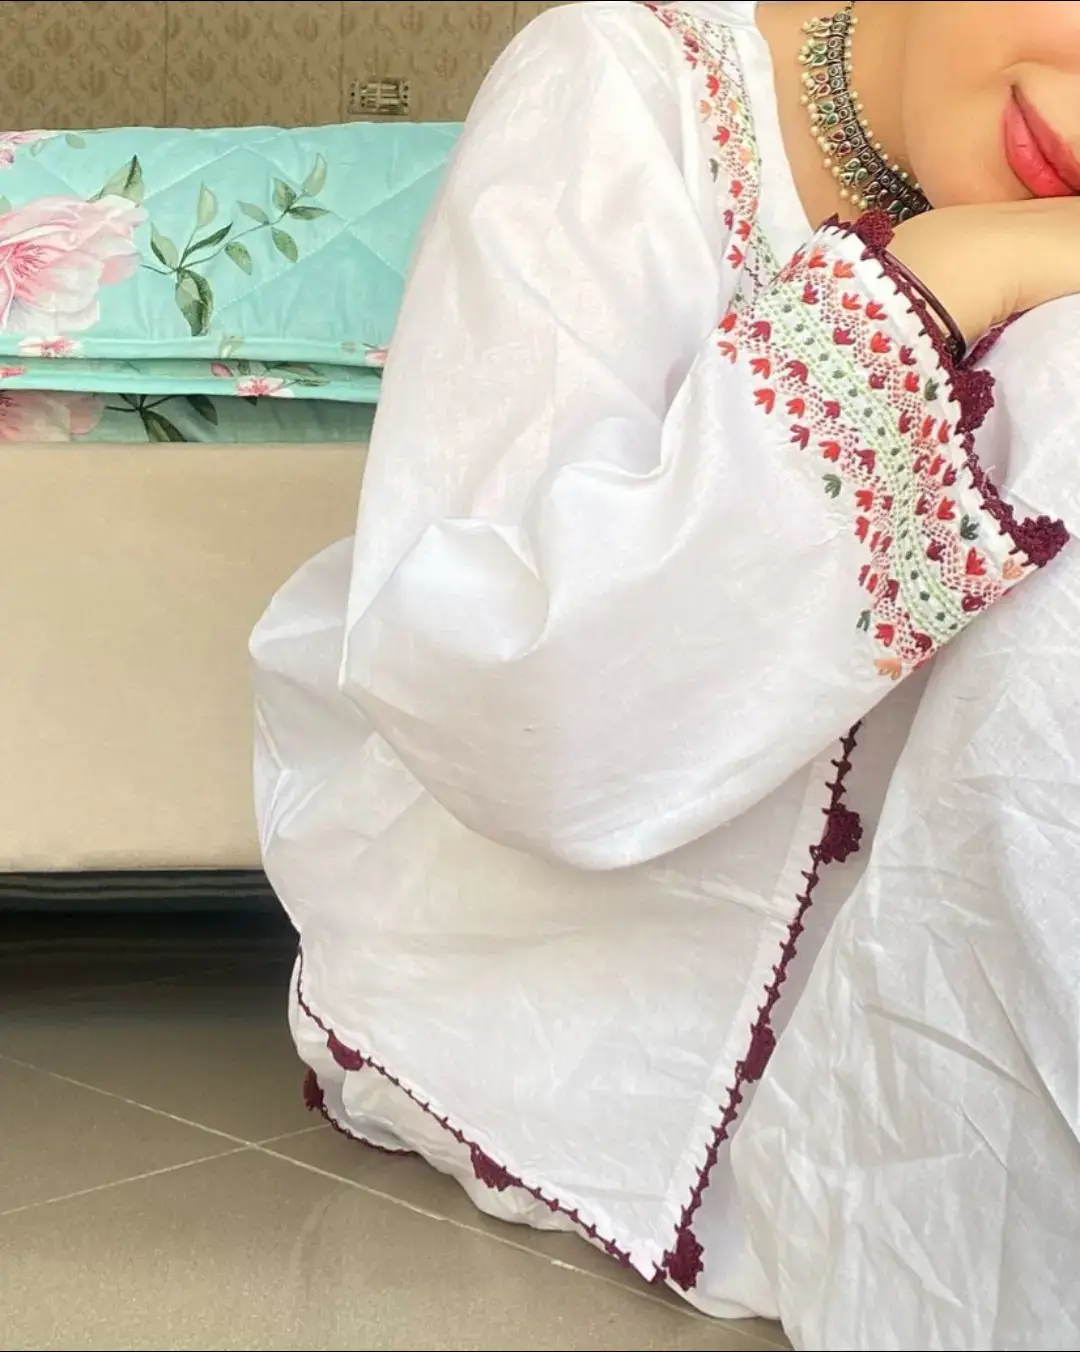 Wearing this beautiful dress mehruniisa Make on order  All size available  Color can be costomize on your choice  Delivery time 15 to 25 days  Half payment advance for order confirmation #viral #foryoupageofficiall #trending #foryou #tiktokpakistan #sindhicollection785 #1billionlikes❤️ #sindhi #sindhistatus #worldwideshipping #fyp #tiktok #sindhidress #foryoupage #fypp #foryoupageofficiall 